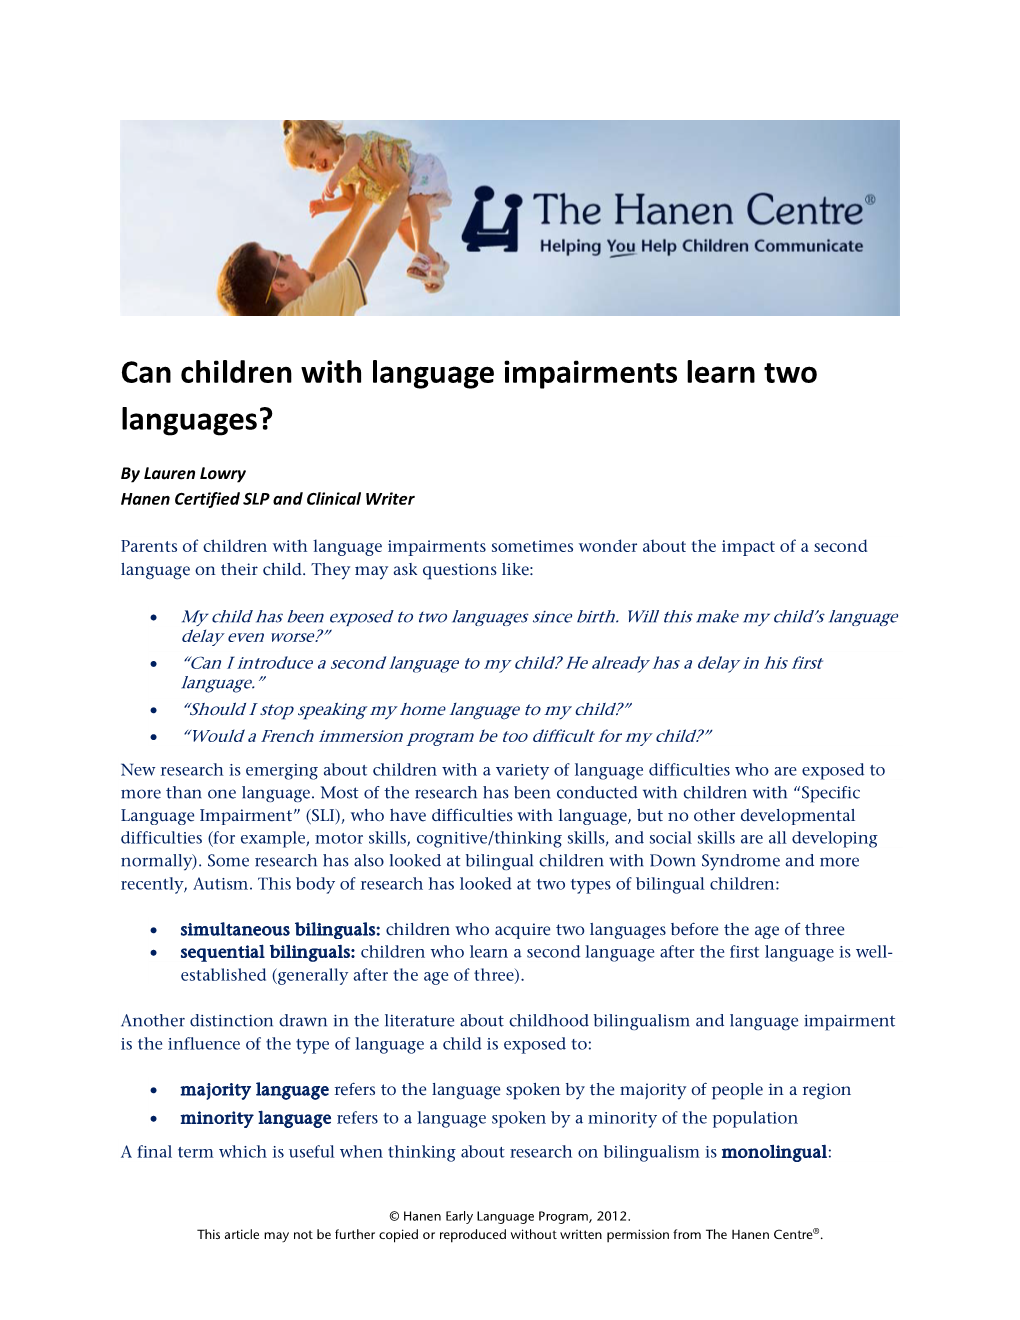 Can Children with Language Impairments Learn Two Languages?